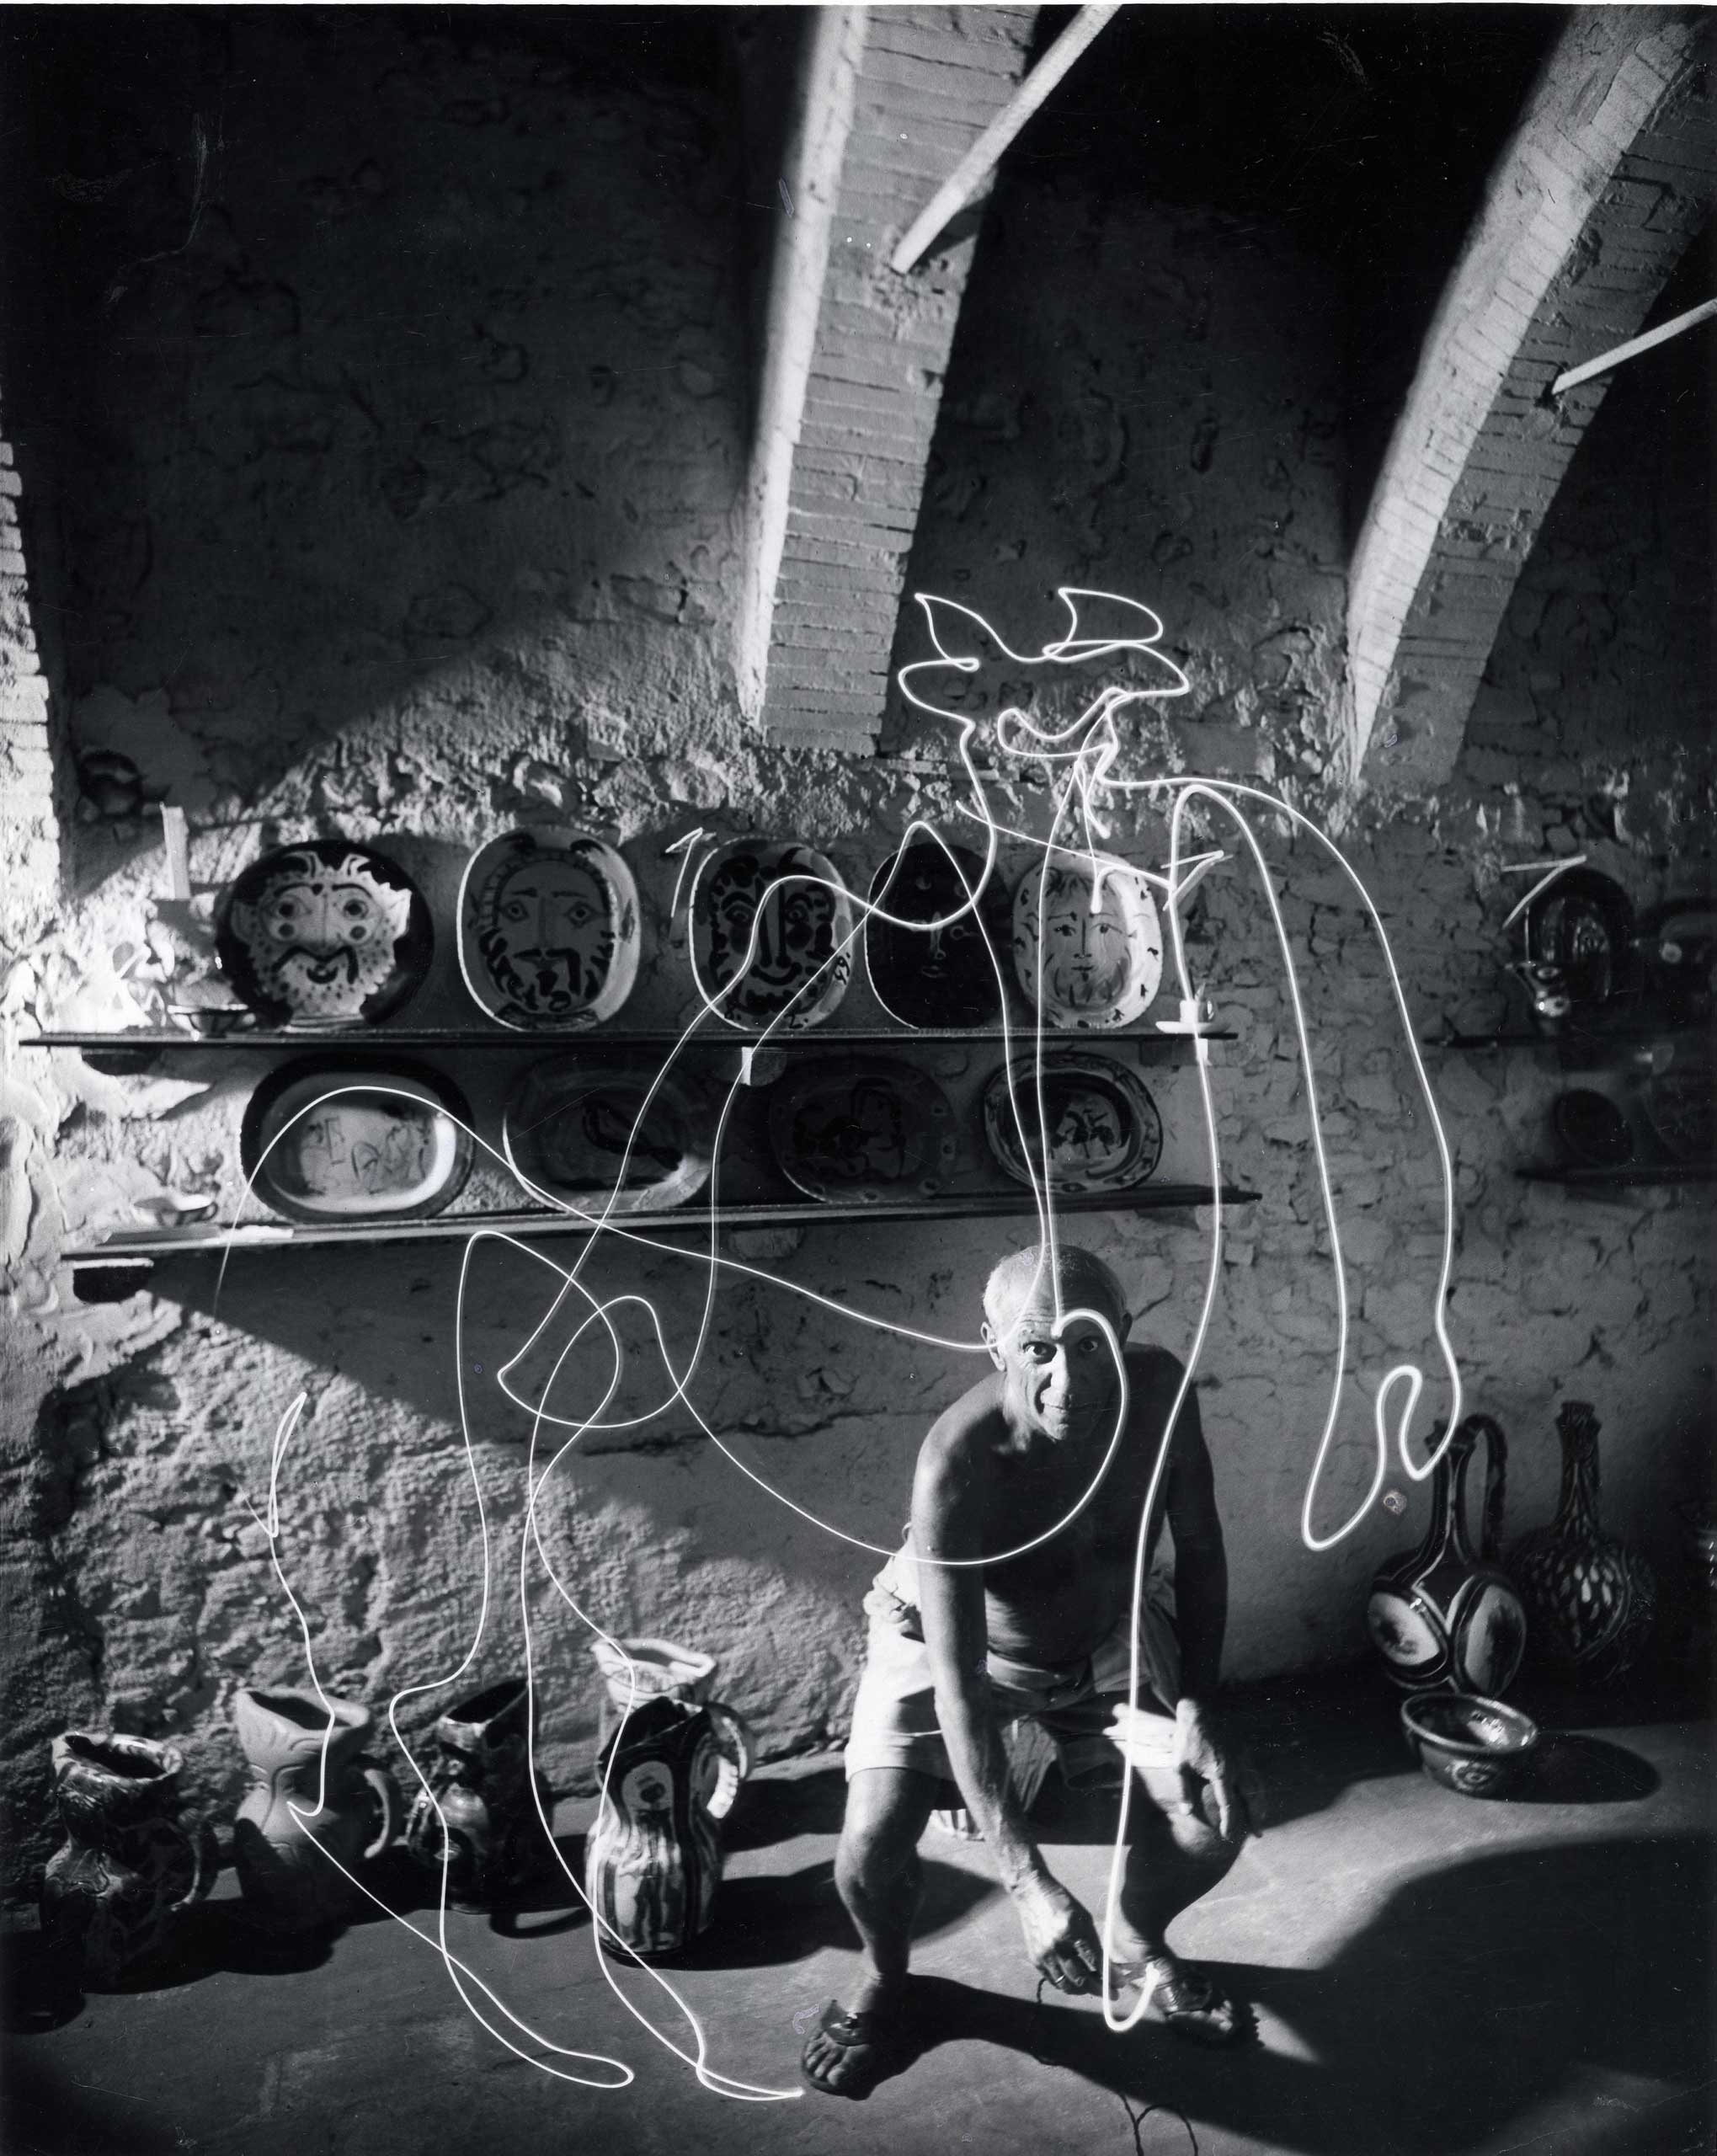 Pablo Picasso drafts a centaur in mid-air with a "light pen" in southeastern France. Originally published in the January 30, 1950, issue of LIFE.